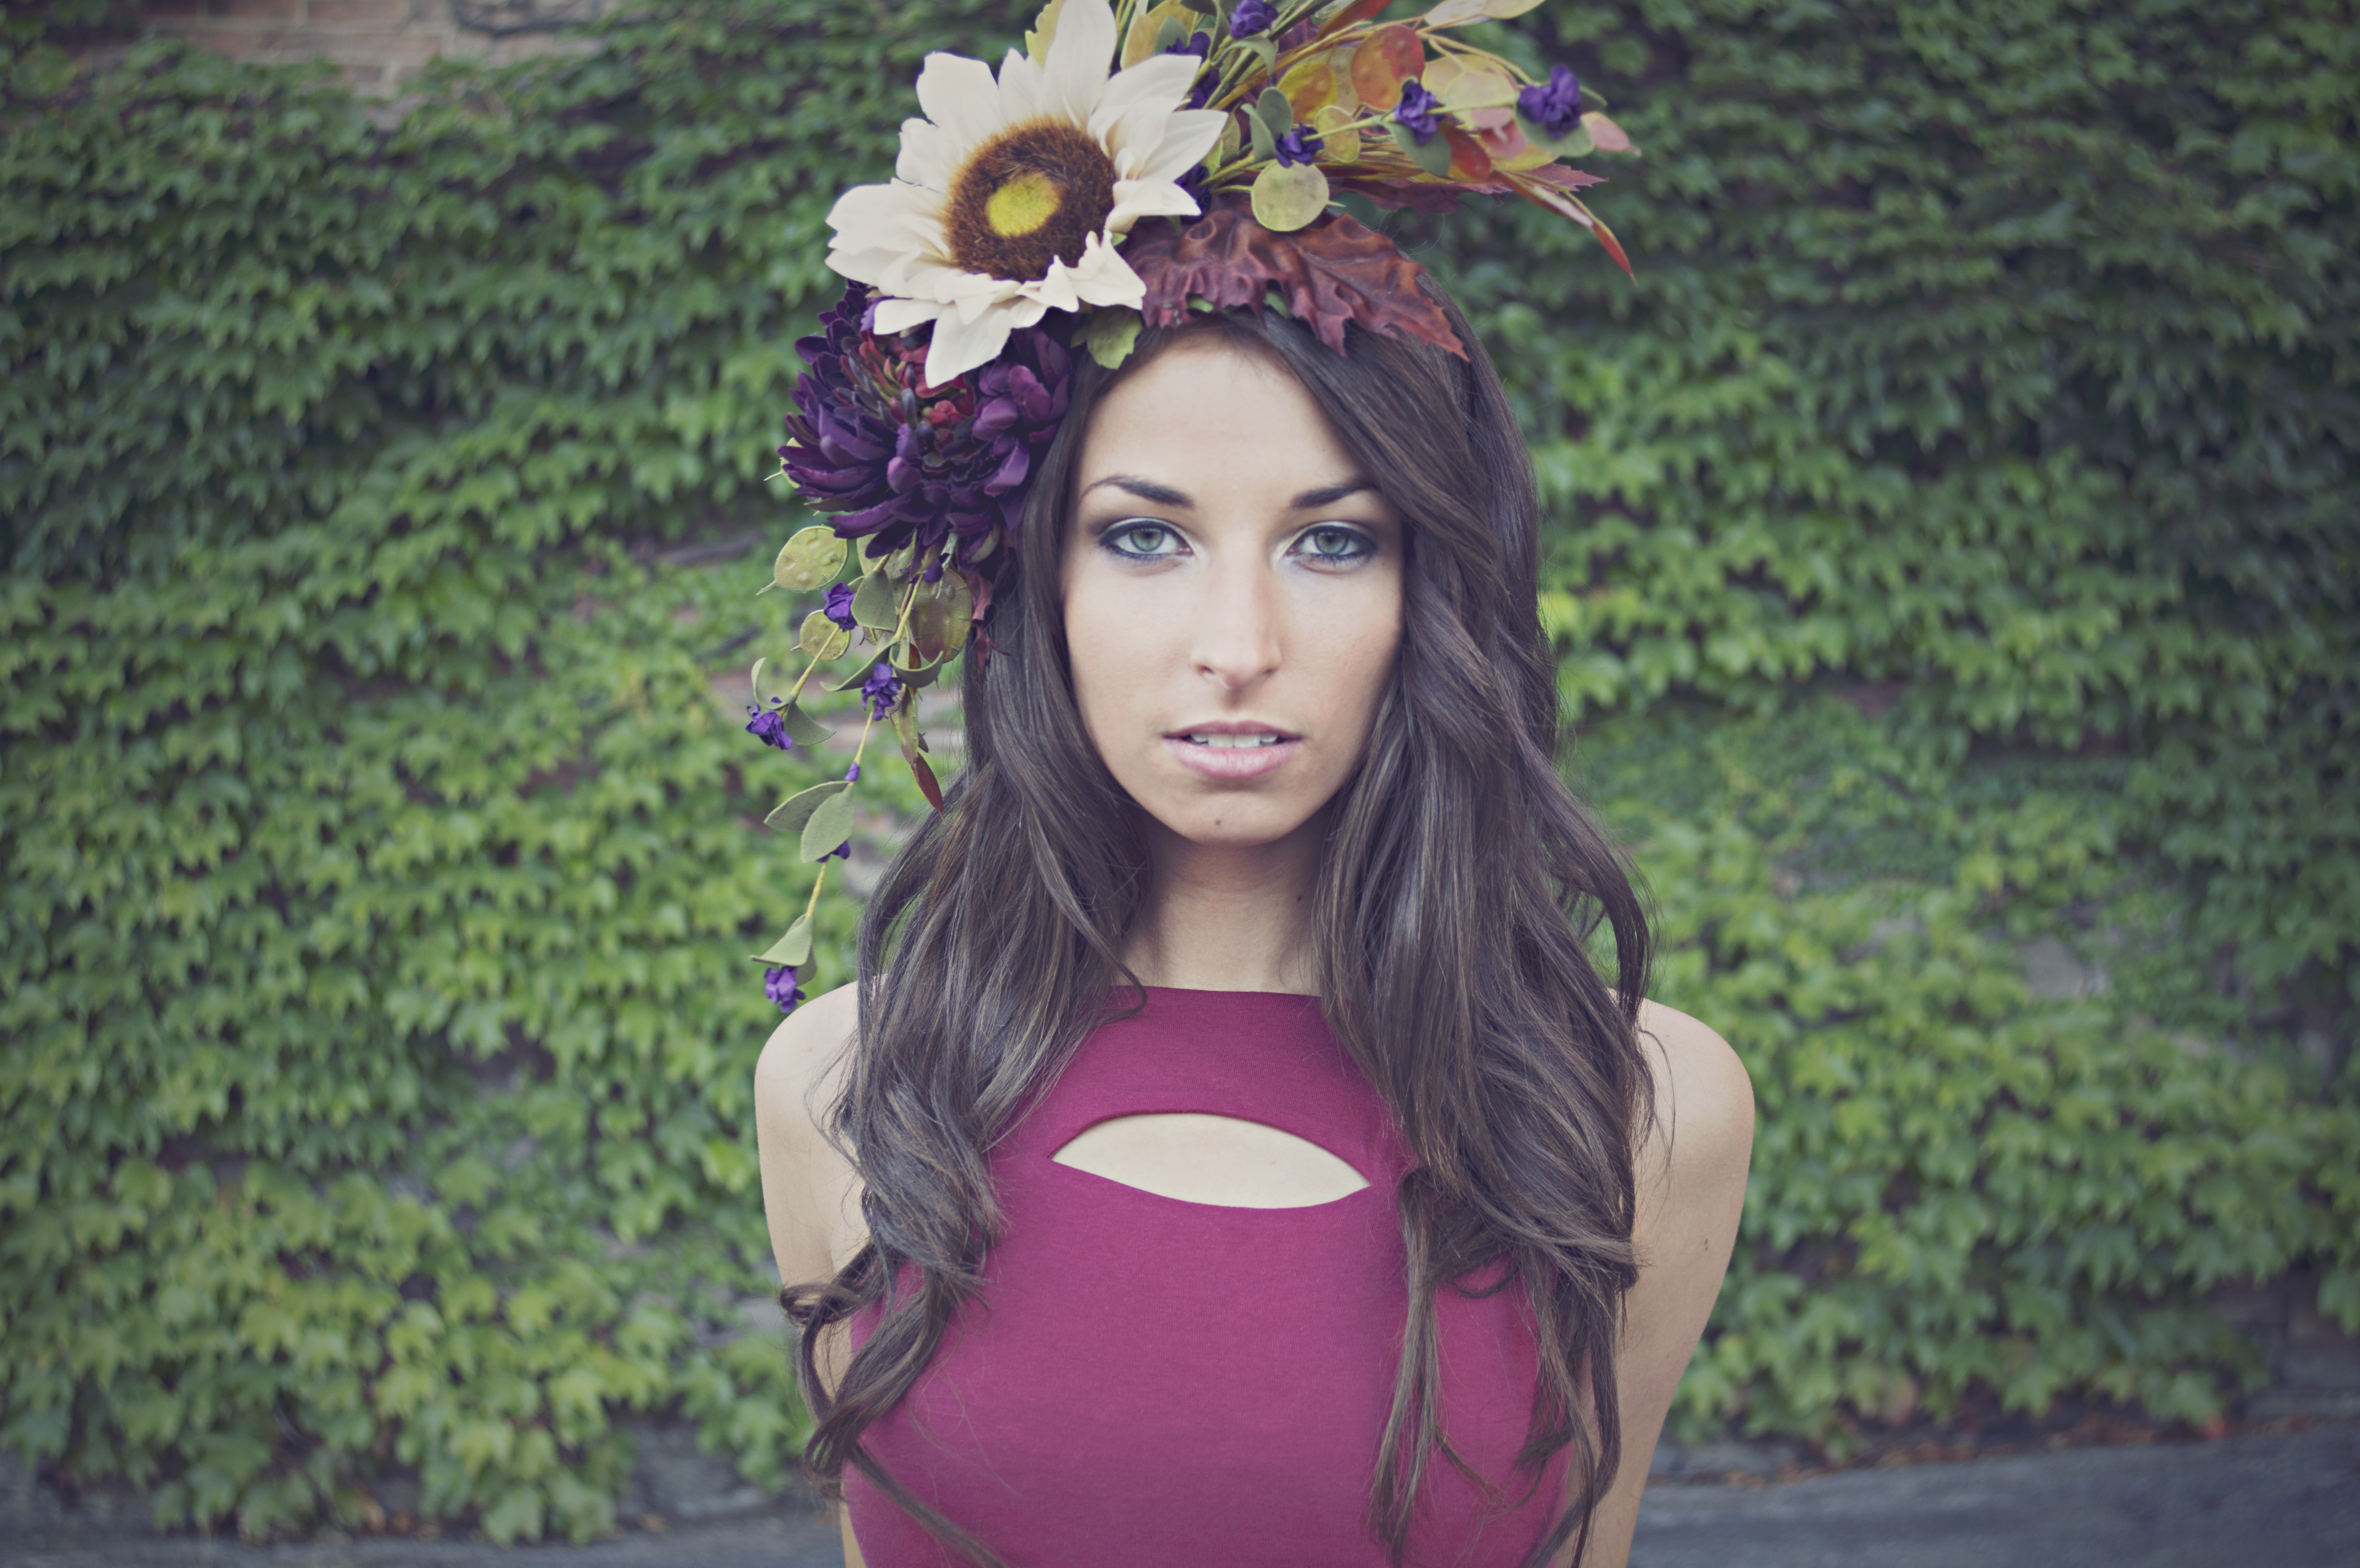 Modeling headpiece by Marc's Blossoms & Blooms Floral Design